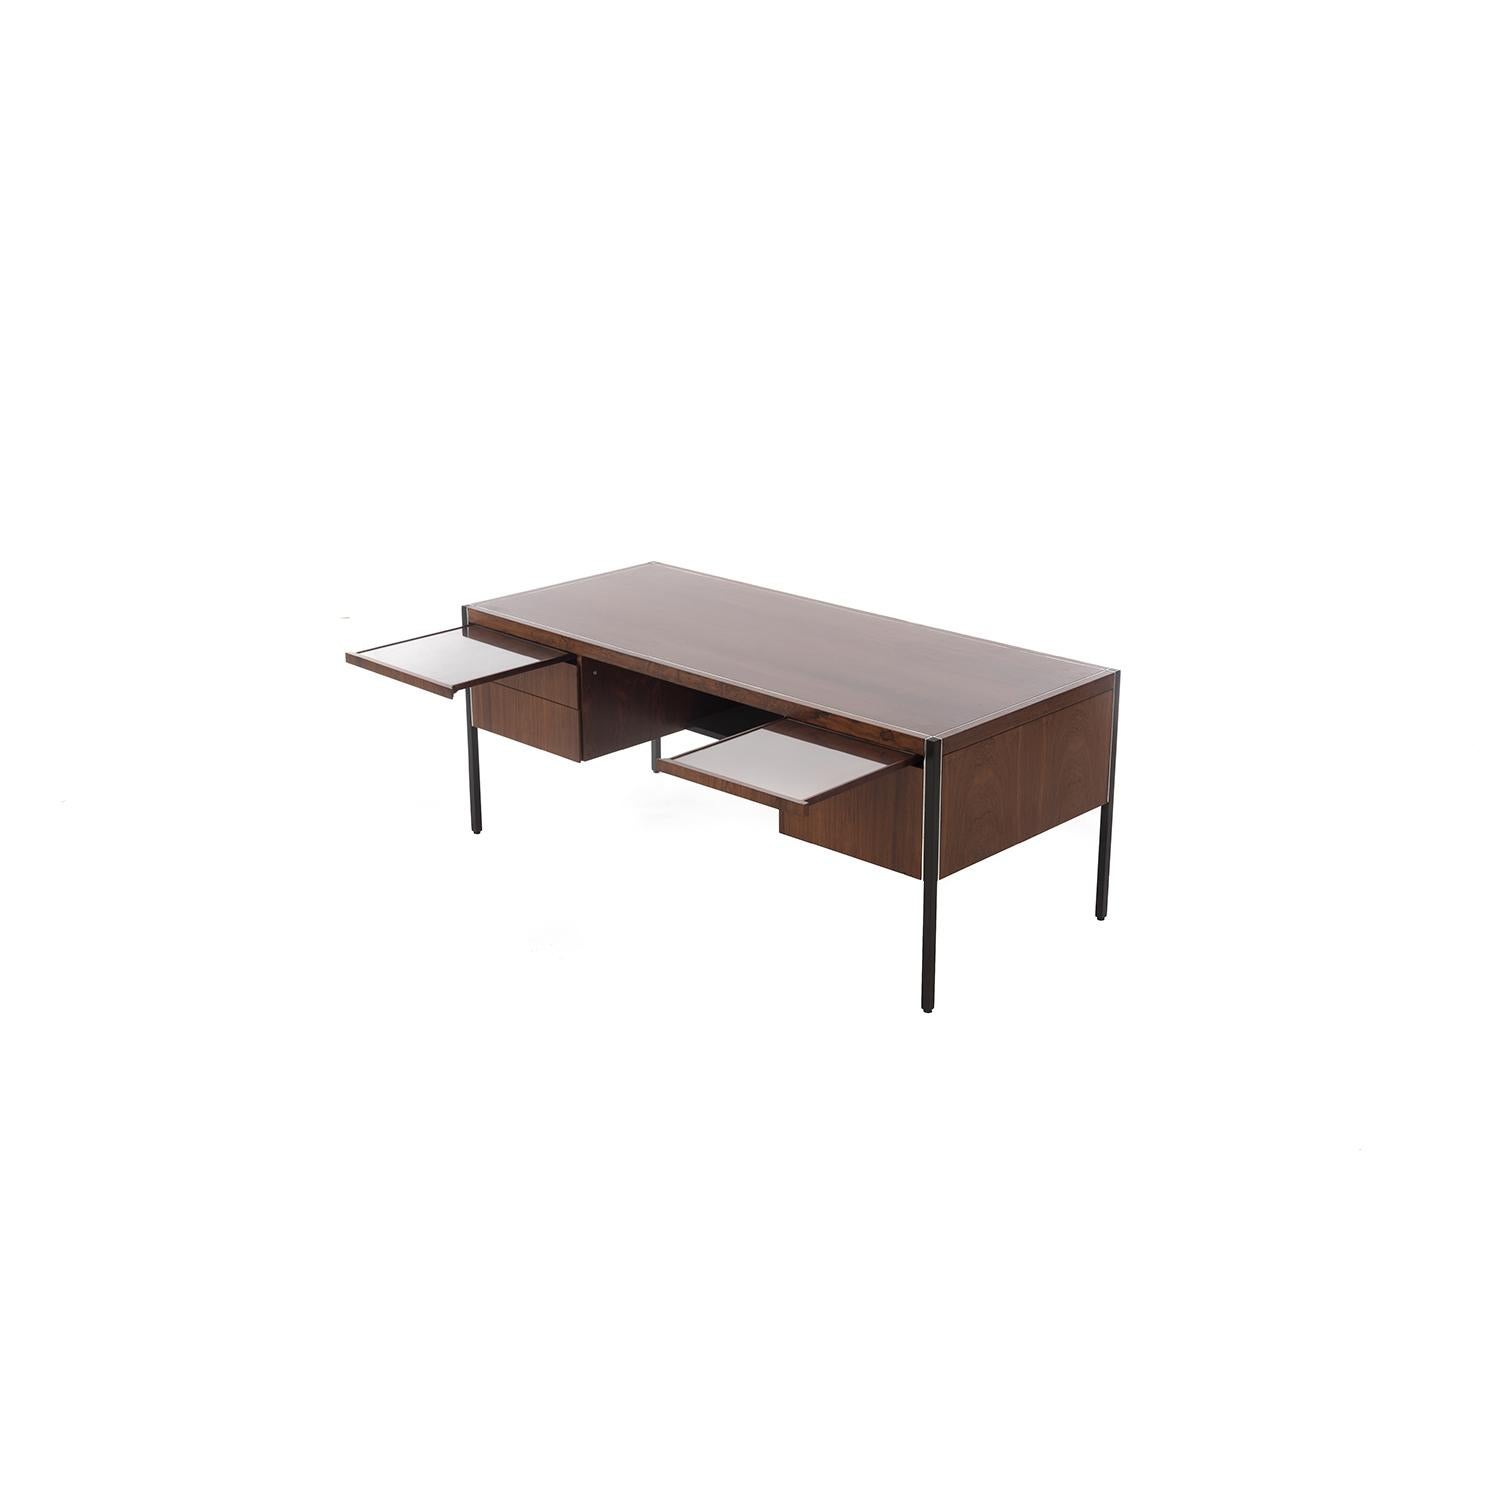 20th Century Midcentury Executive Desk in Rosewood by Richard Schultz for Knoll